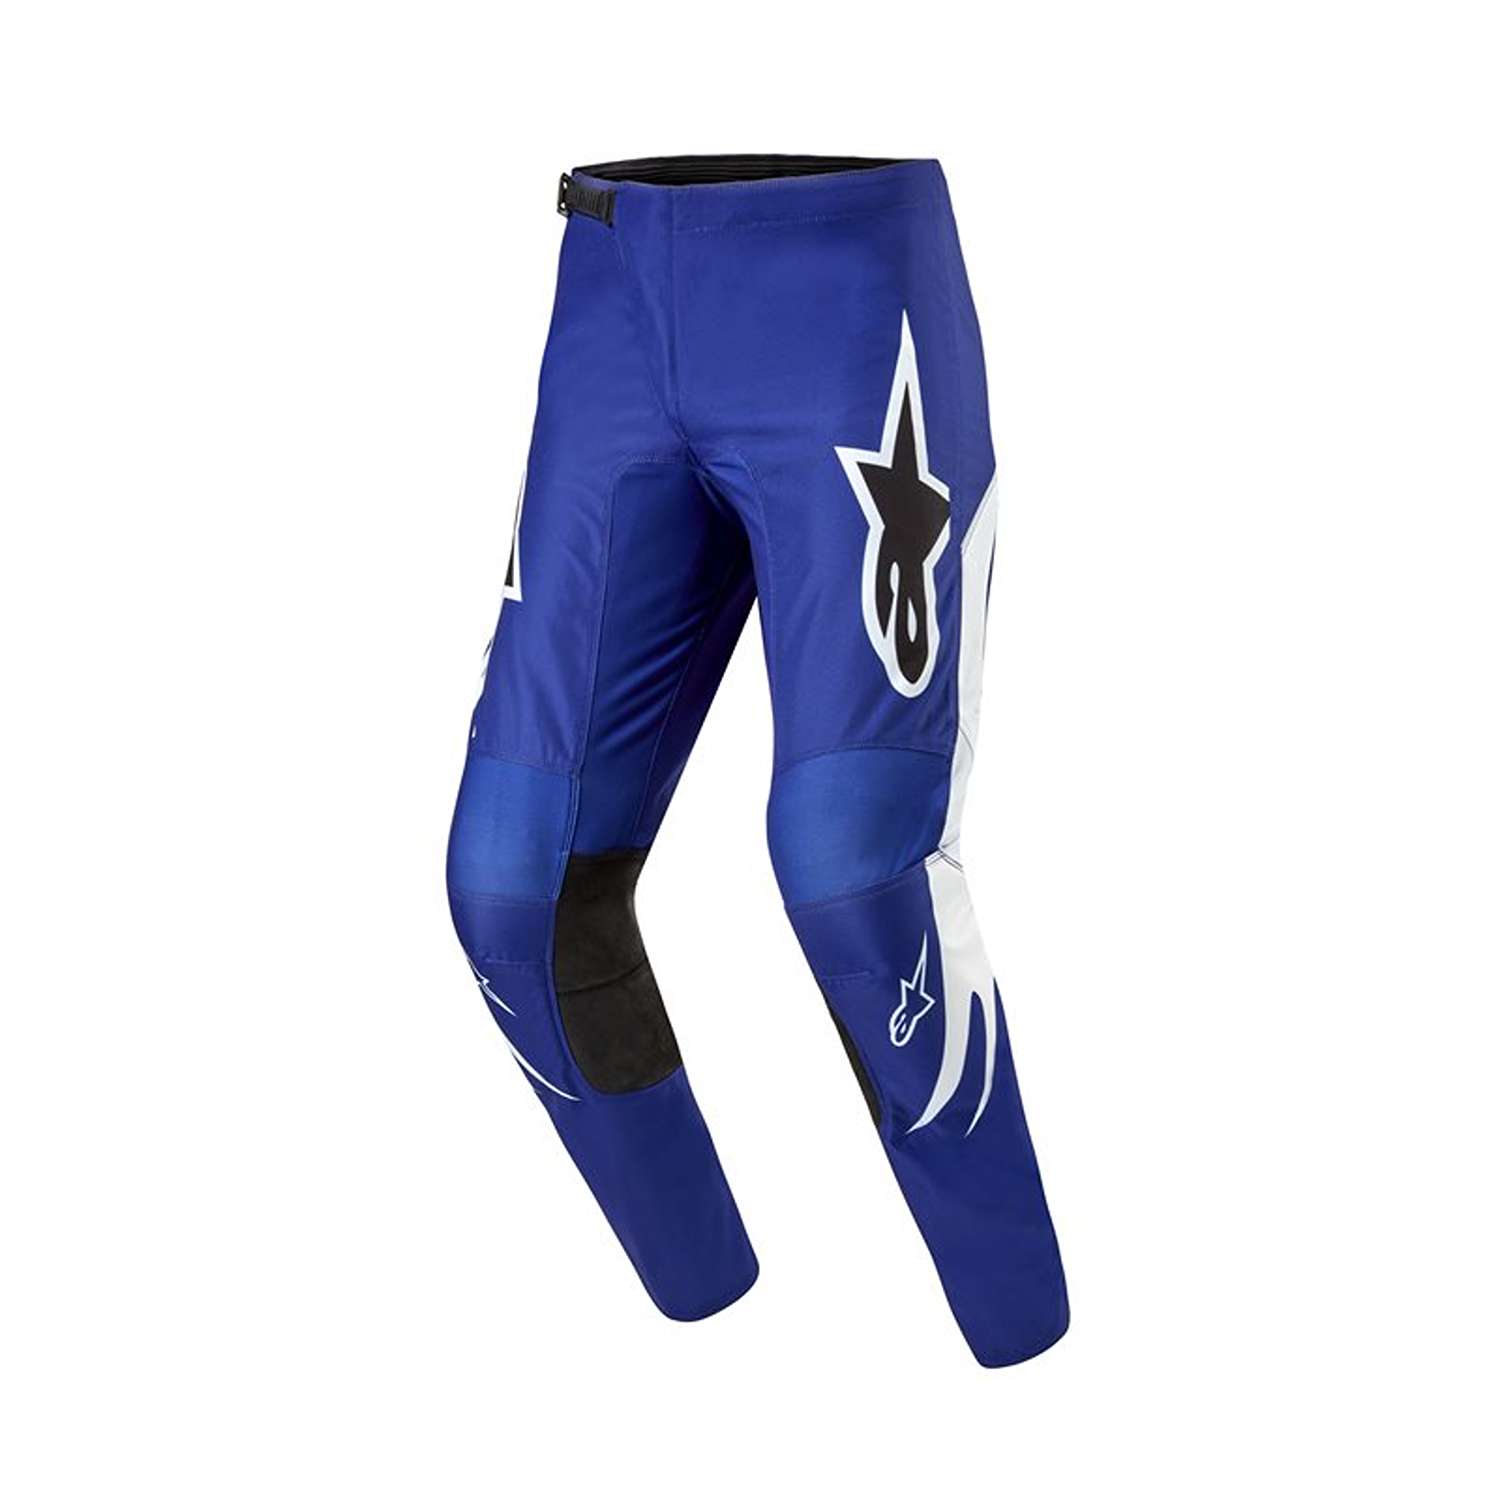 Image of EU Alpinestars Fluid Lucent Pants Blue Ray White Taille 32